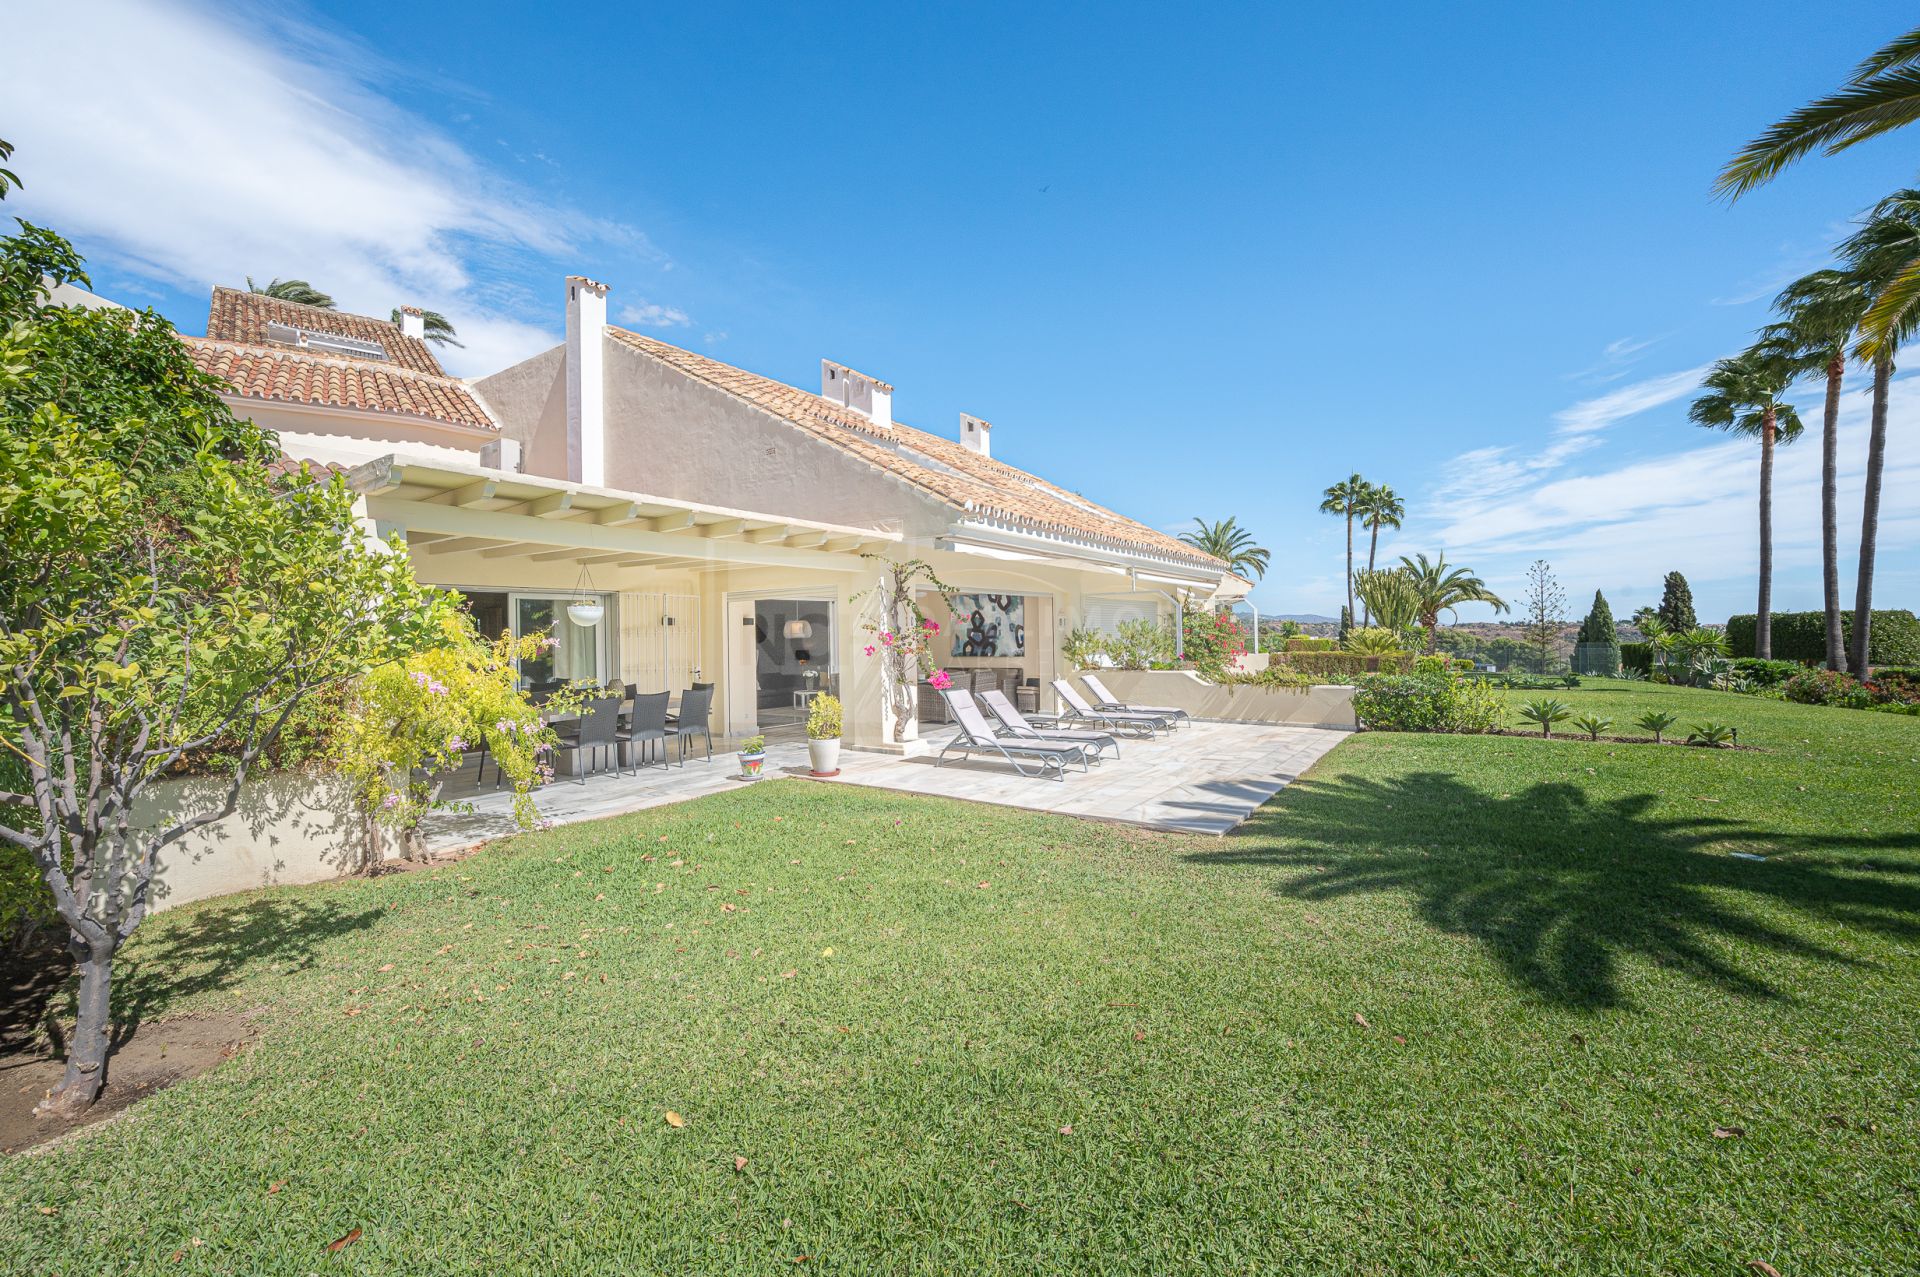 LOCATION! SUPERB 4-BEDROOM TOWNHOUSE OVERLOOKING GOLF COURSE IN NUEVA ANDALUCIA